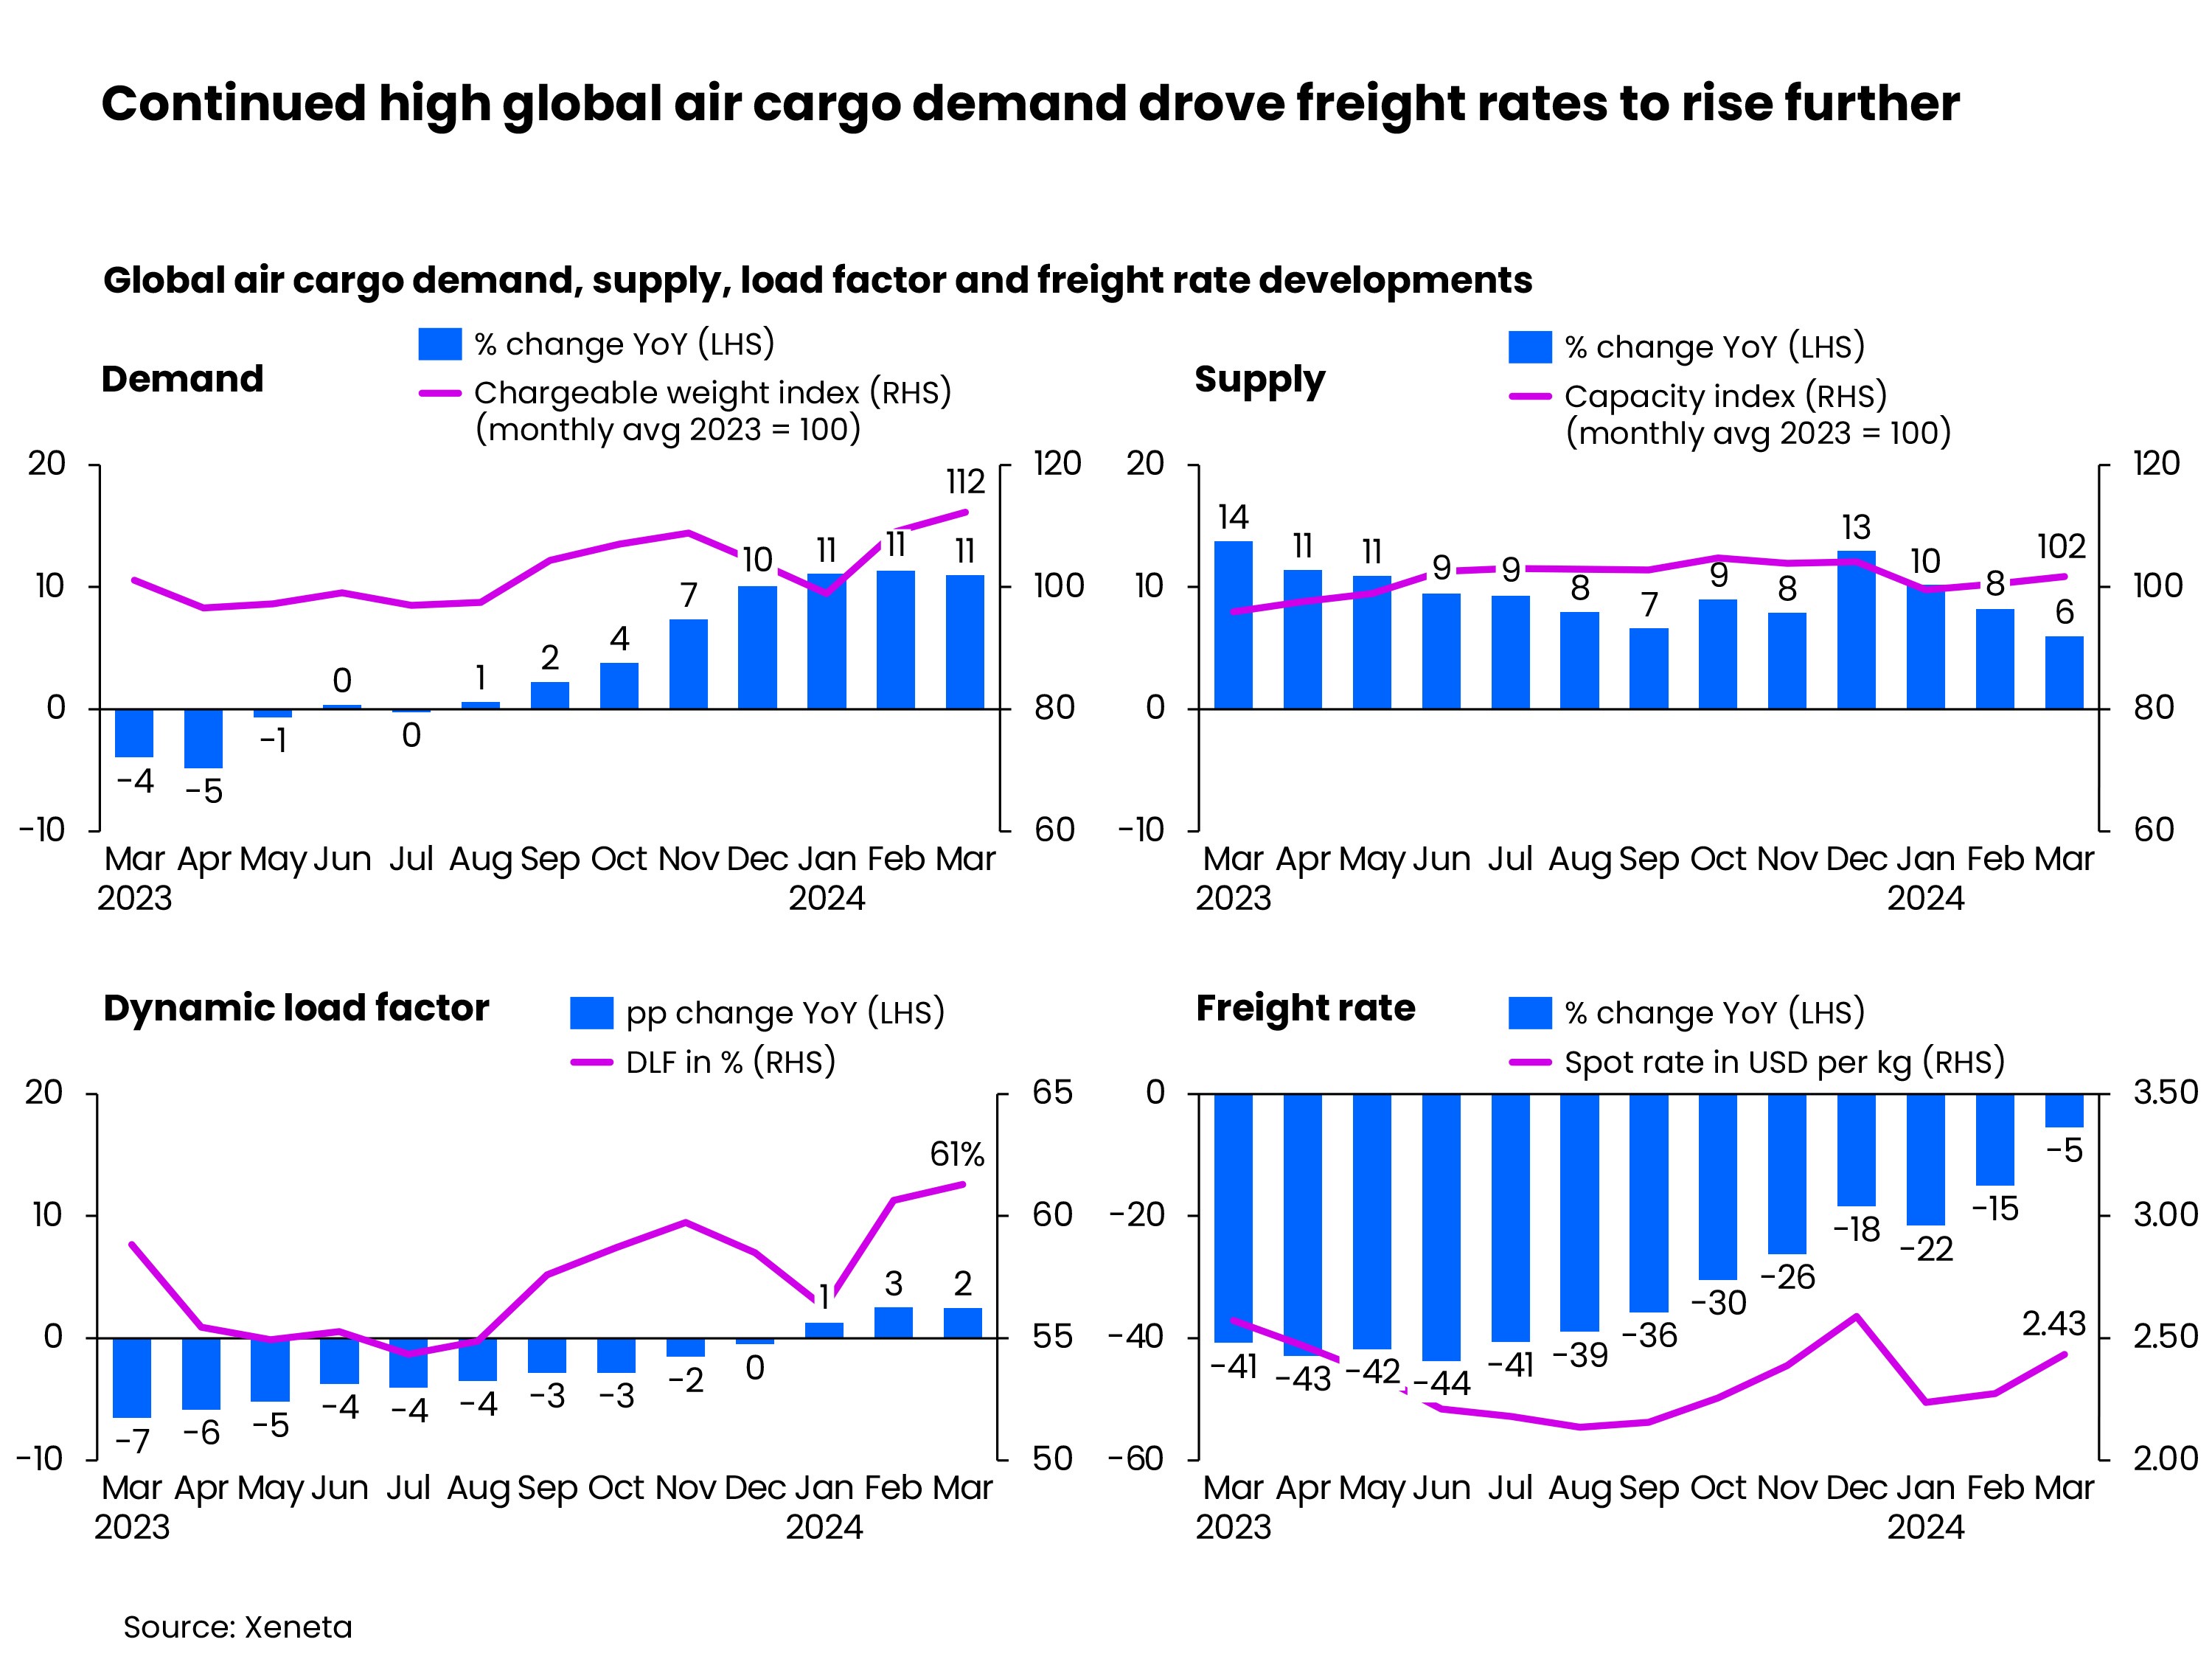 Continued high global air cargo demand drove freight rates to rise further